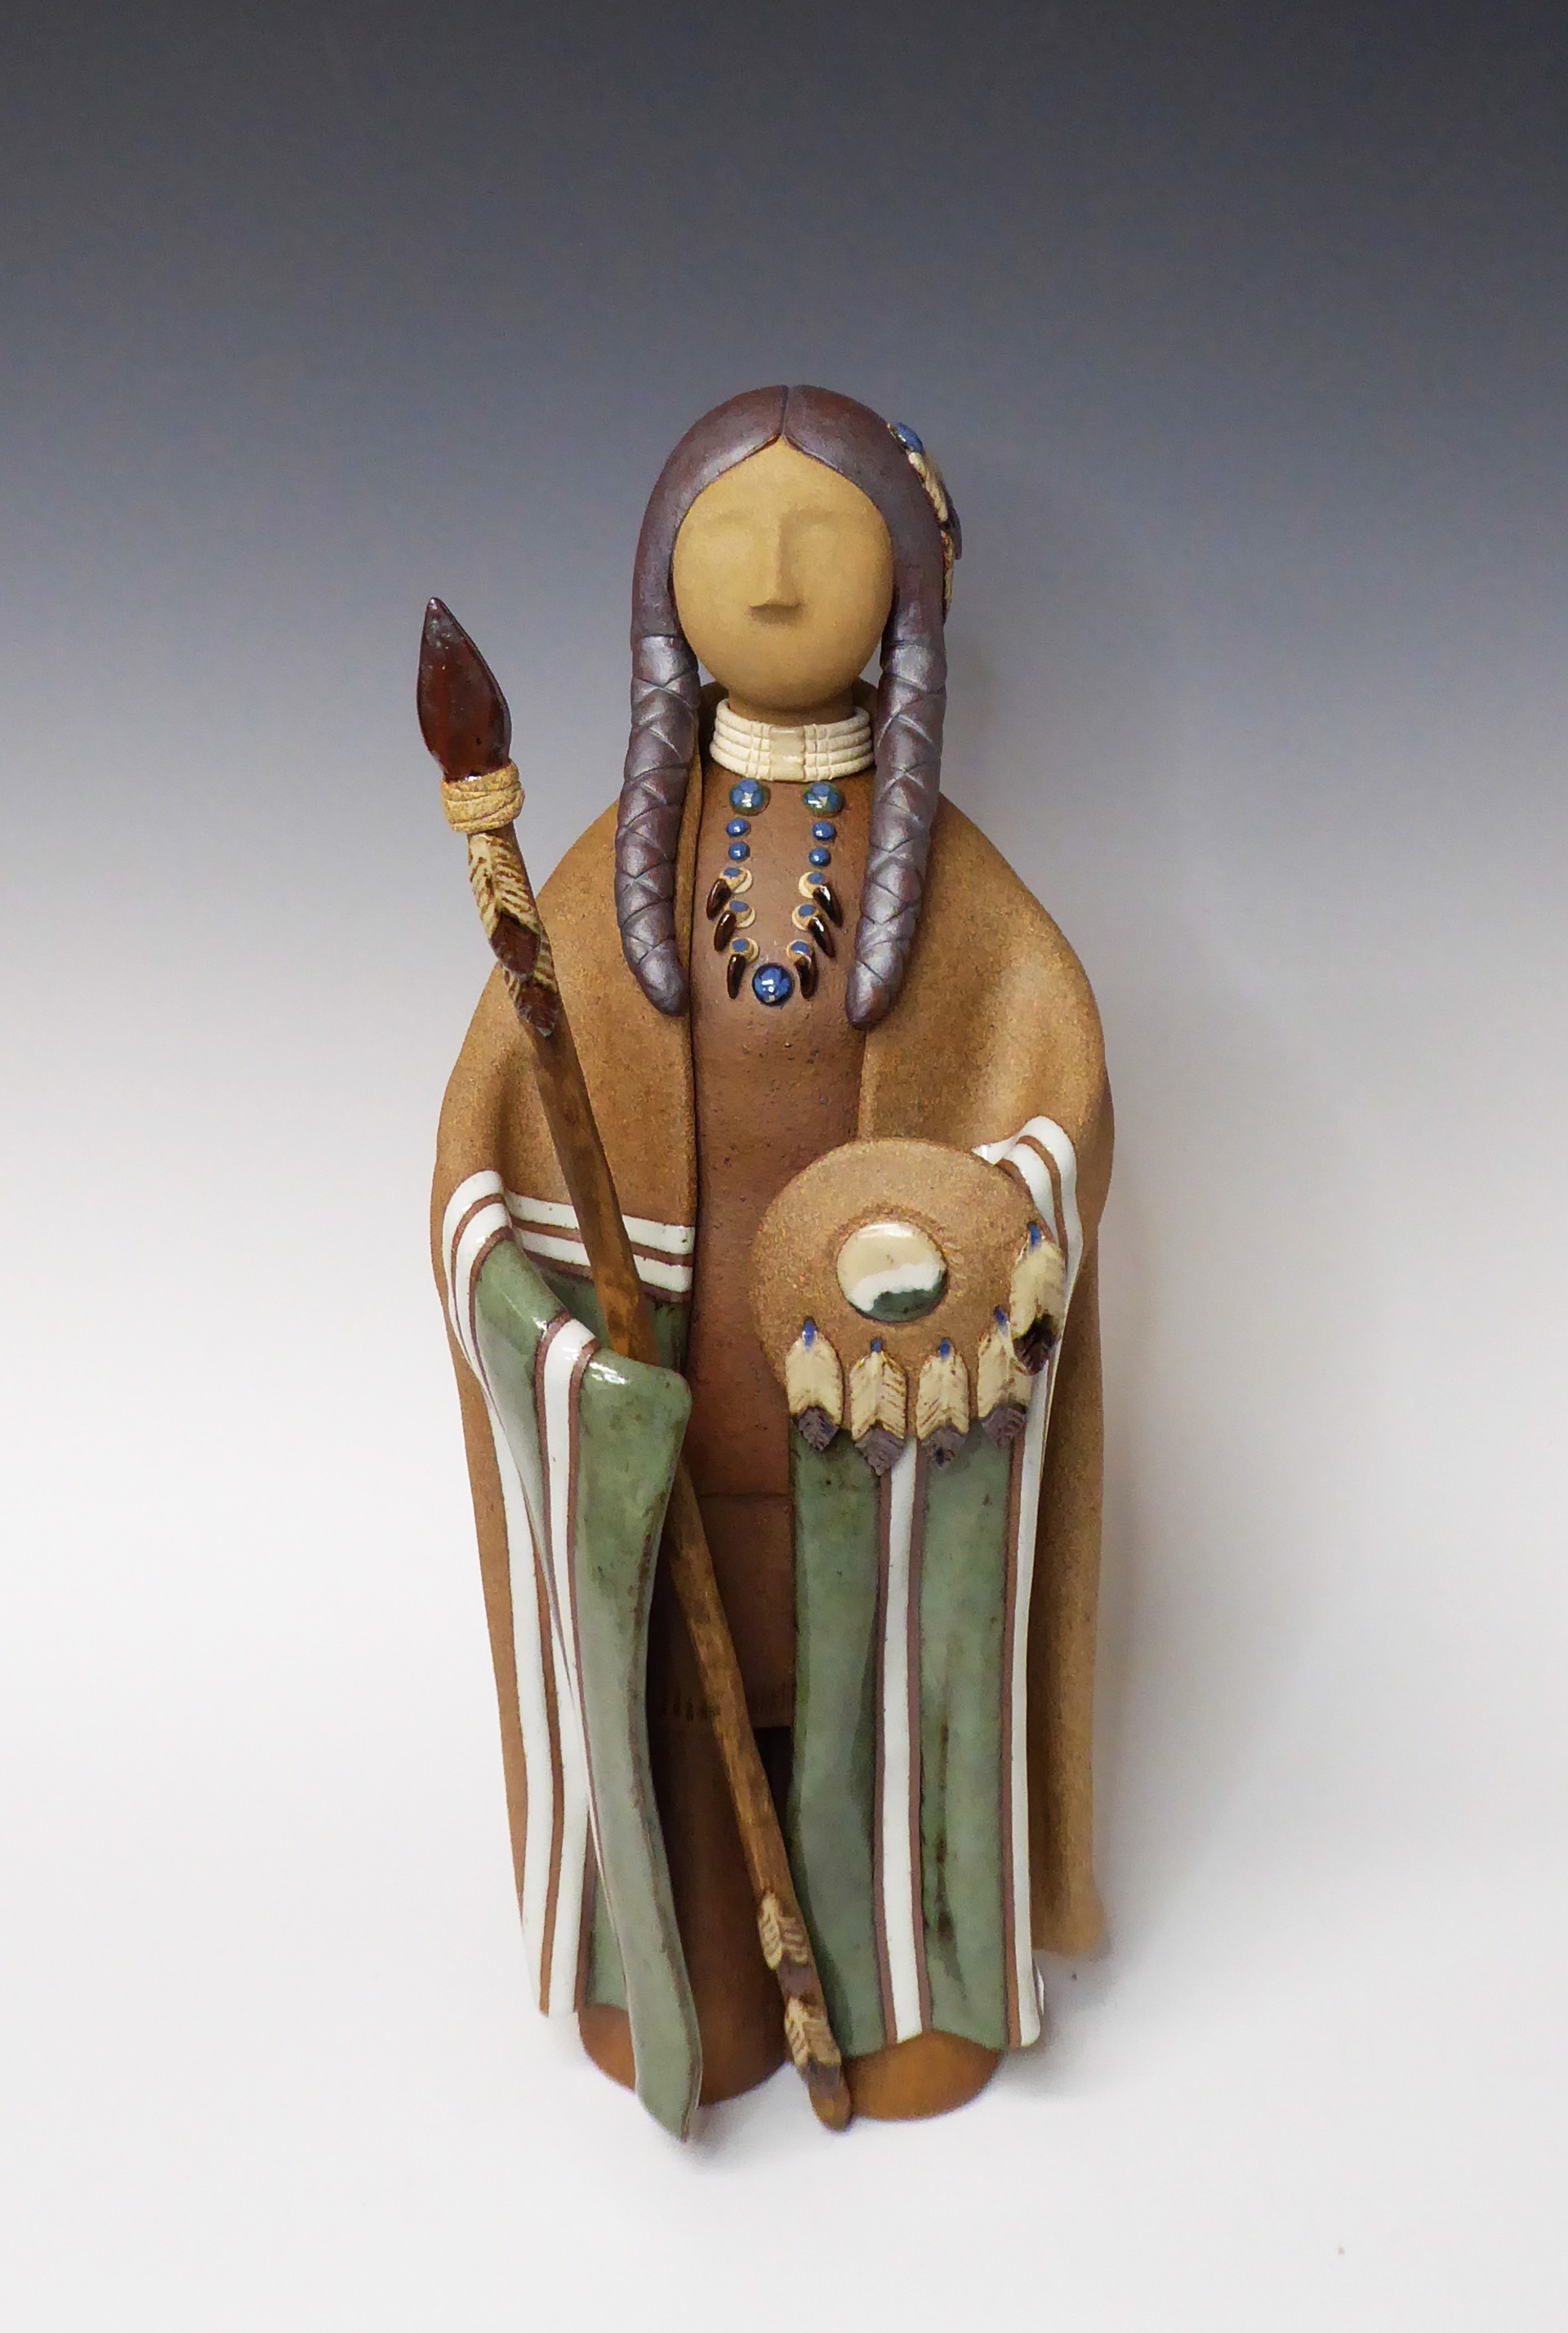 Lakota Warrior - Green Blanket with Shield and Spear by Terry Slonaker